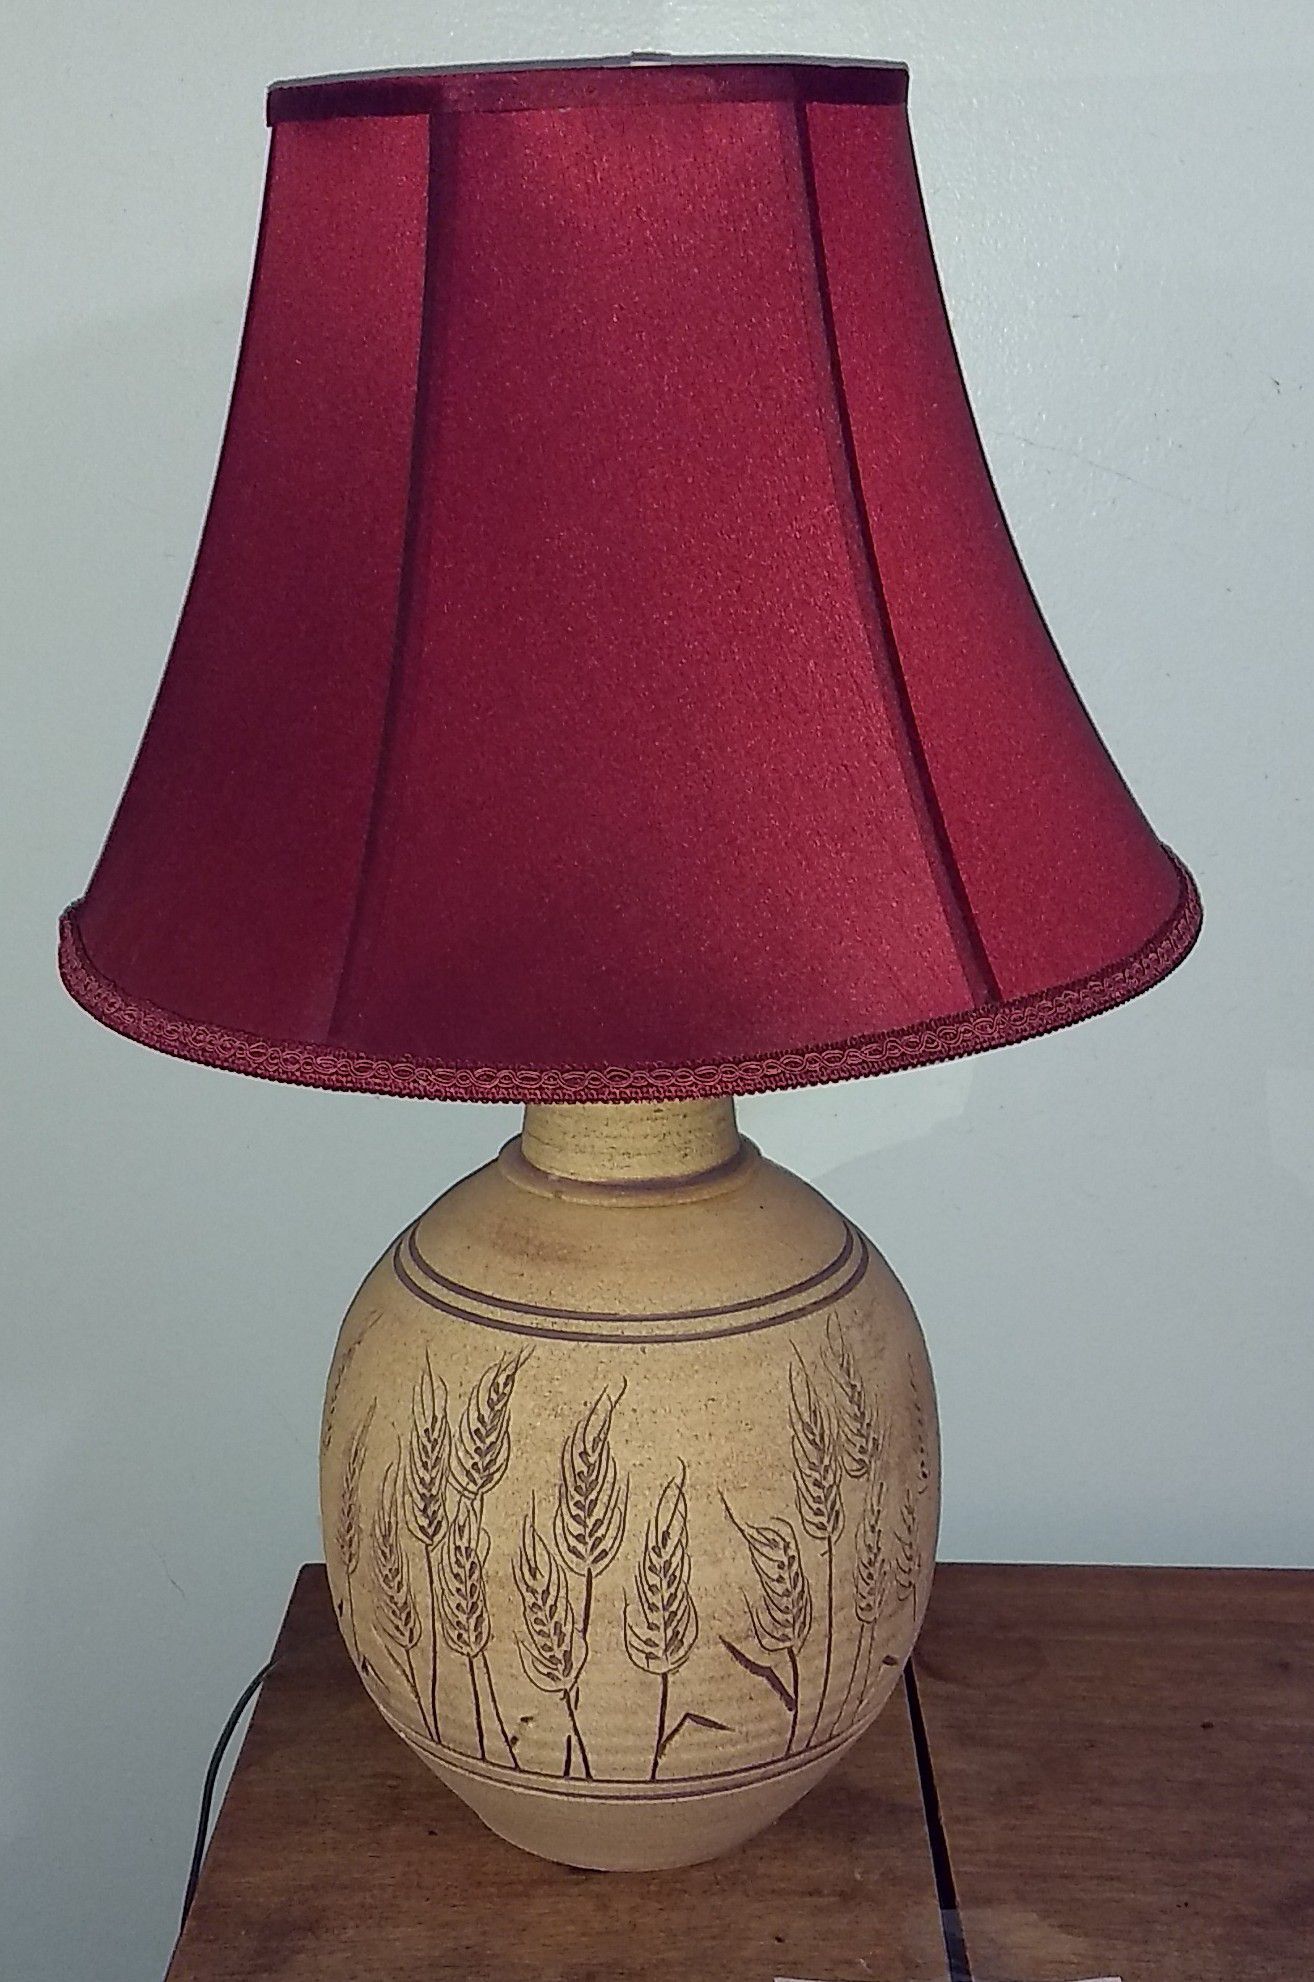 End Table Lamp or bedroom lamp